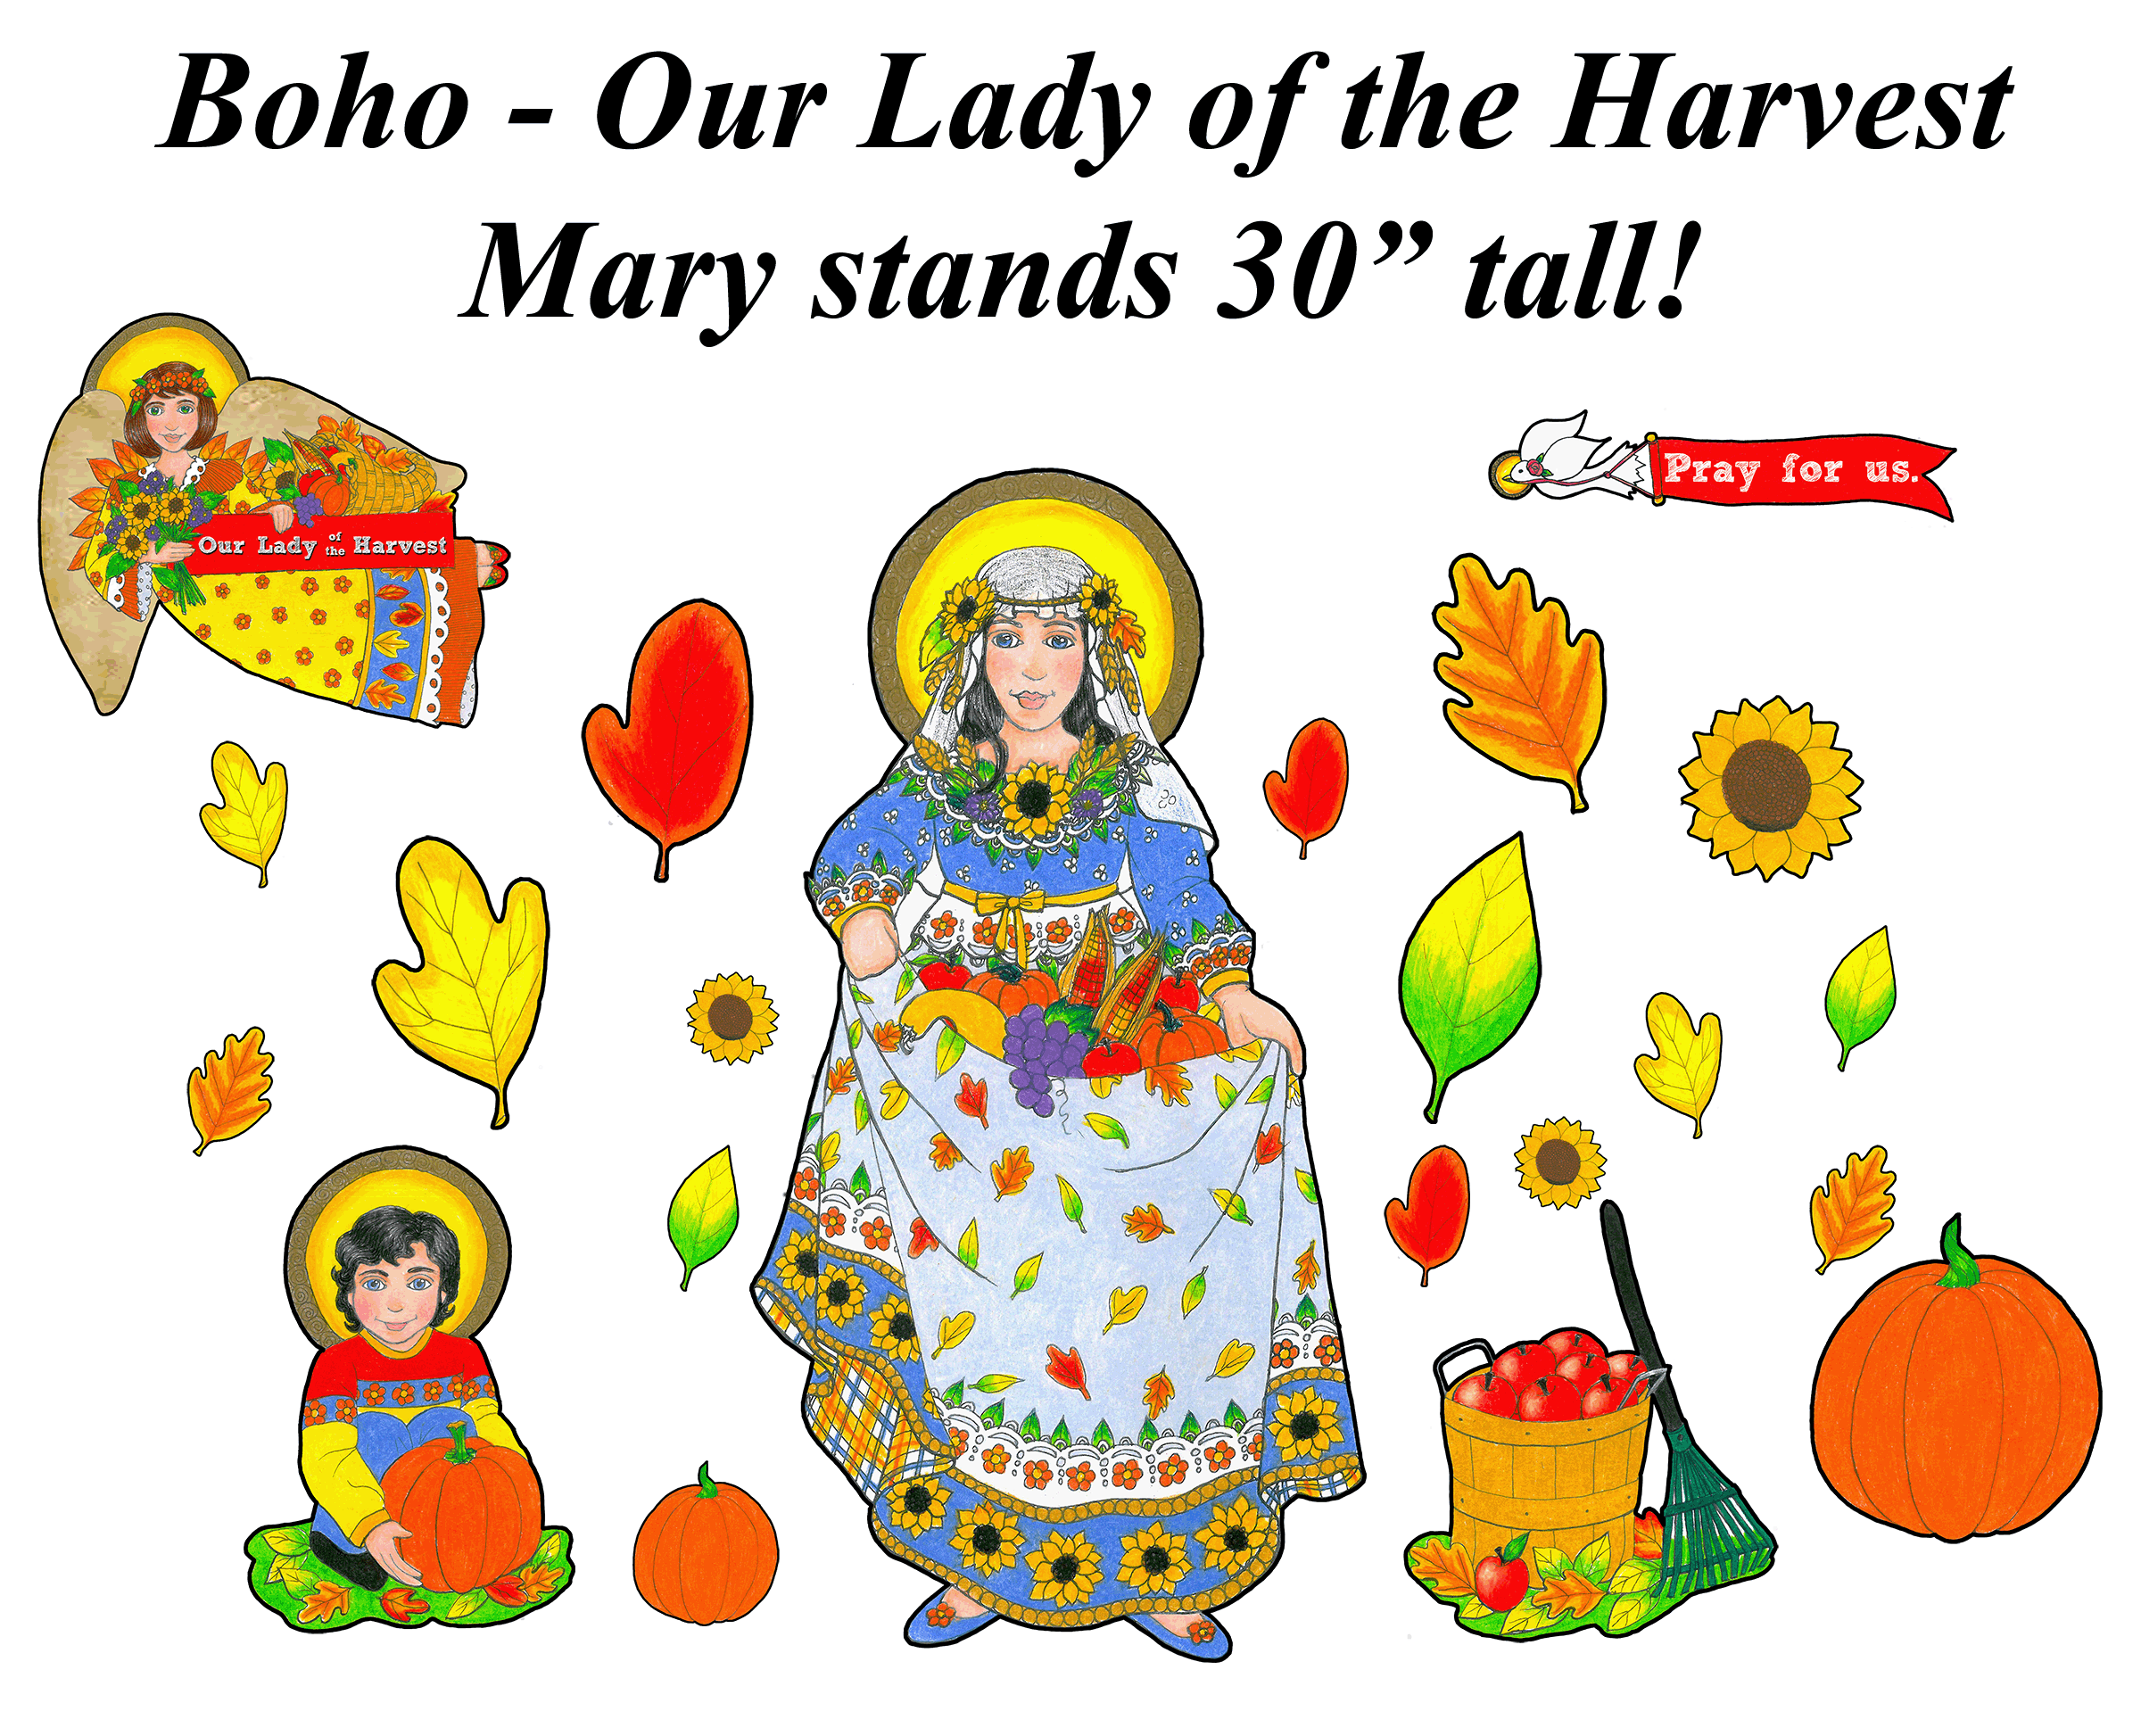 Our Lady of the Harvest